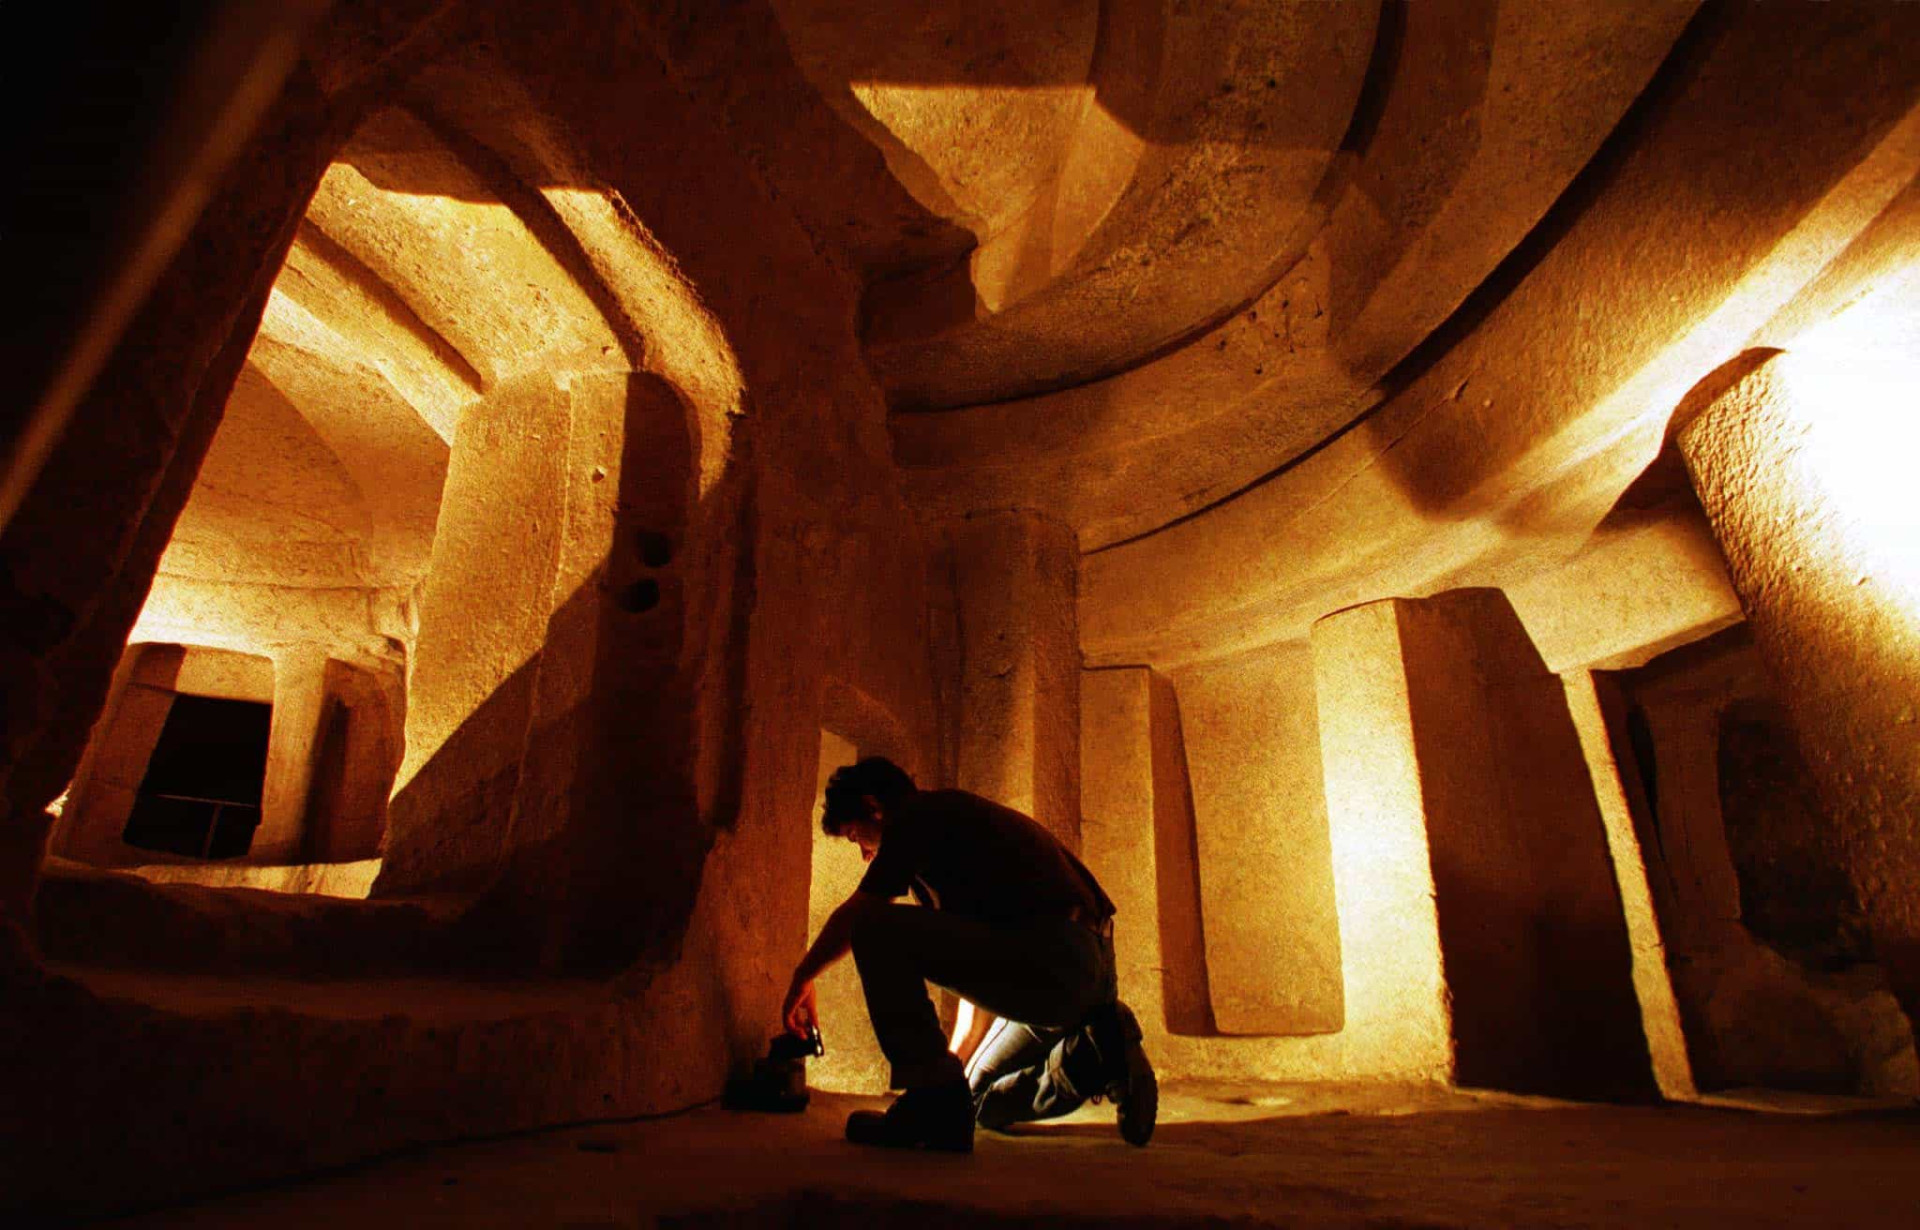 Malta is home to several prehistoric temples, including the Ħal-Saflieni Hypogeum, which is one of the oldest discovered underground temples in the world, dating back more than 5,000 years.<p><a href="https://www.msn.com/en-us/community/channel/vid-7xx8mnucu55yw63we9va2gwr7uihbxwc68fxqp25x6tg4ftibpra?cvid=94631541bc0f4f89bfd59158d696ad7e">Follow us and access great exclusive content every day</a></p>